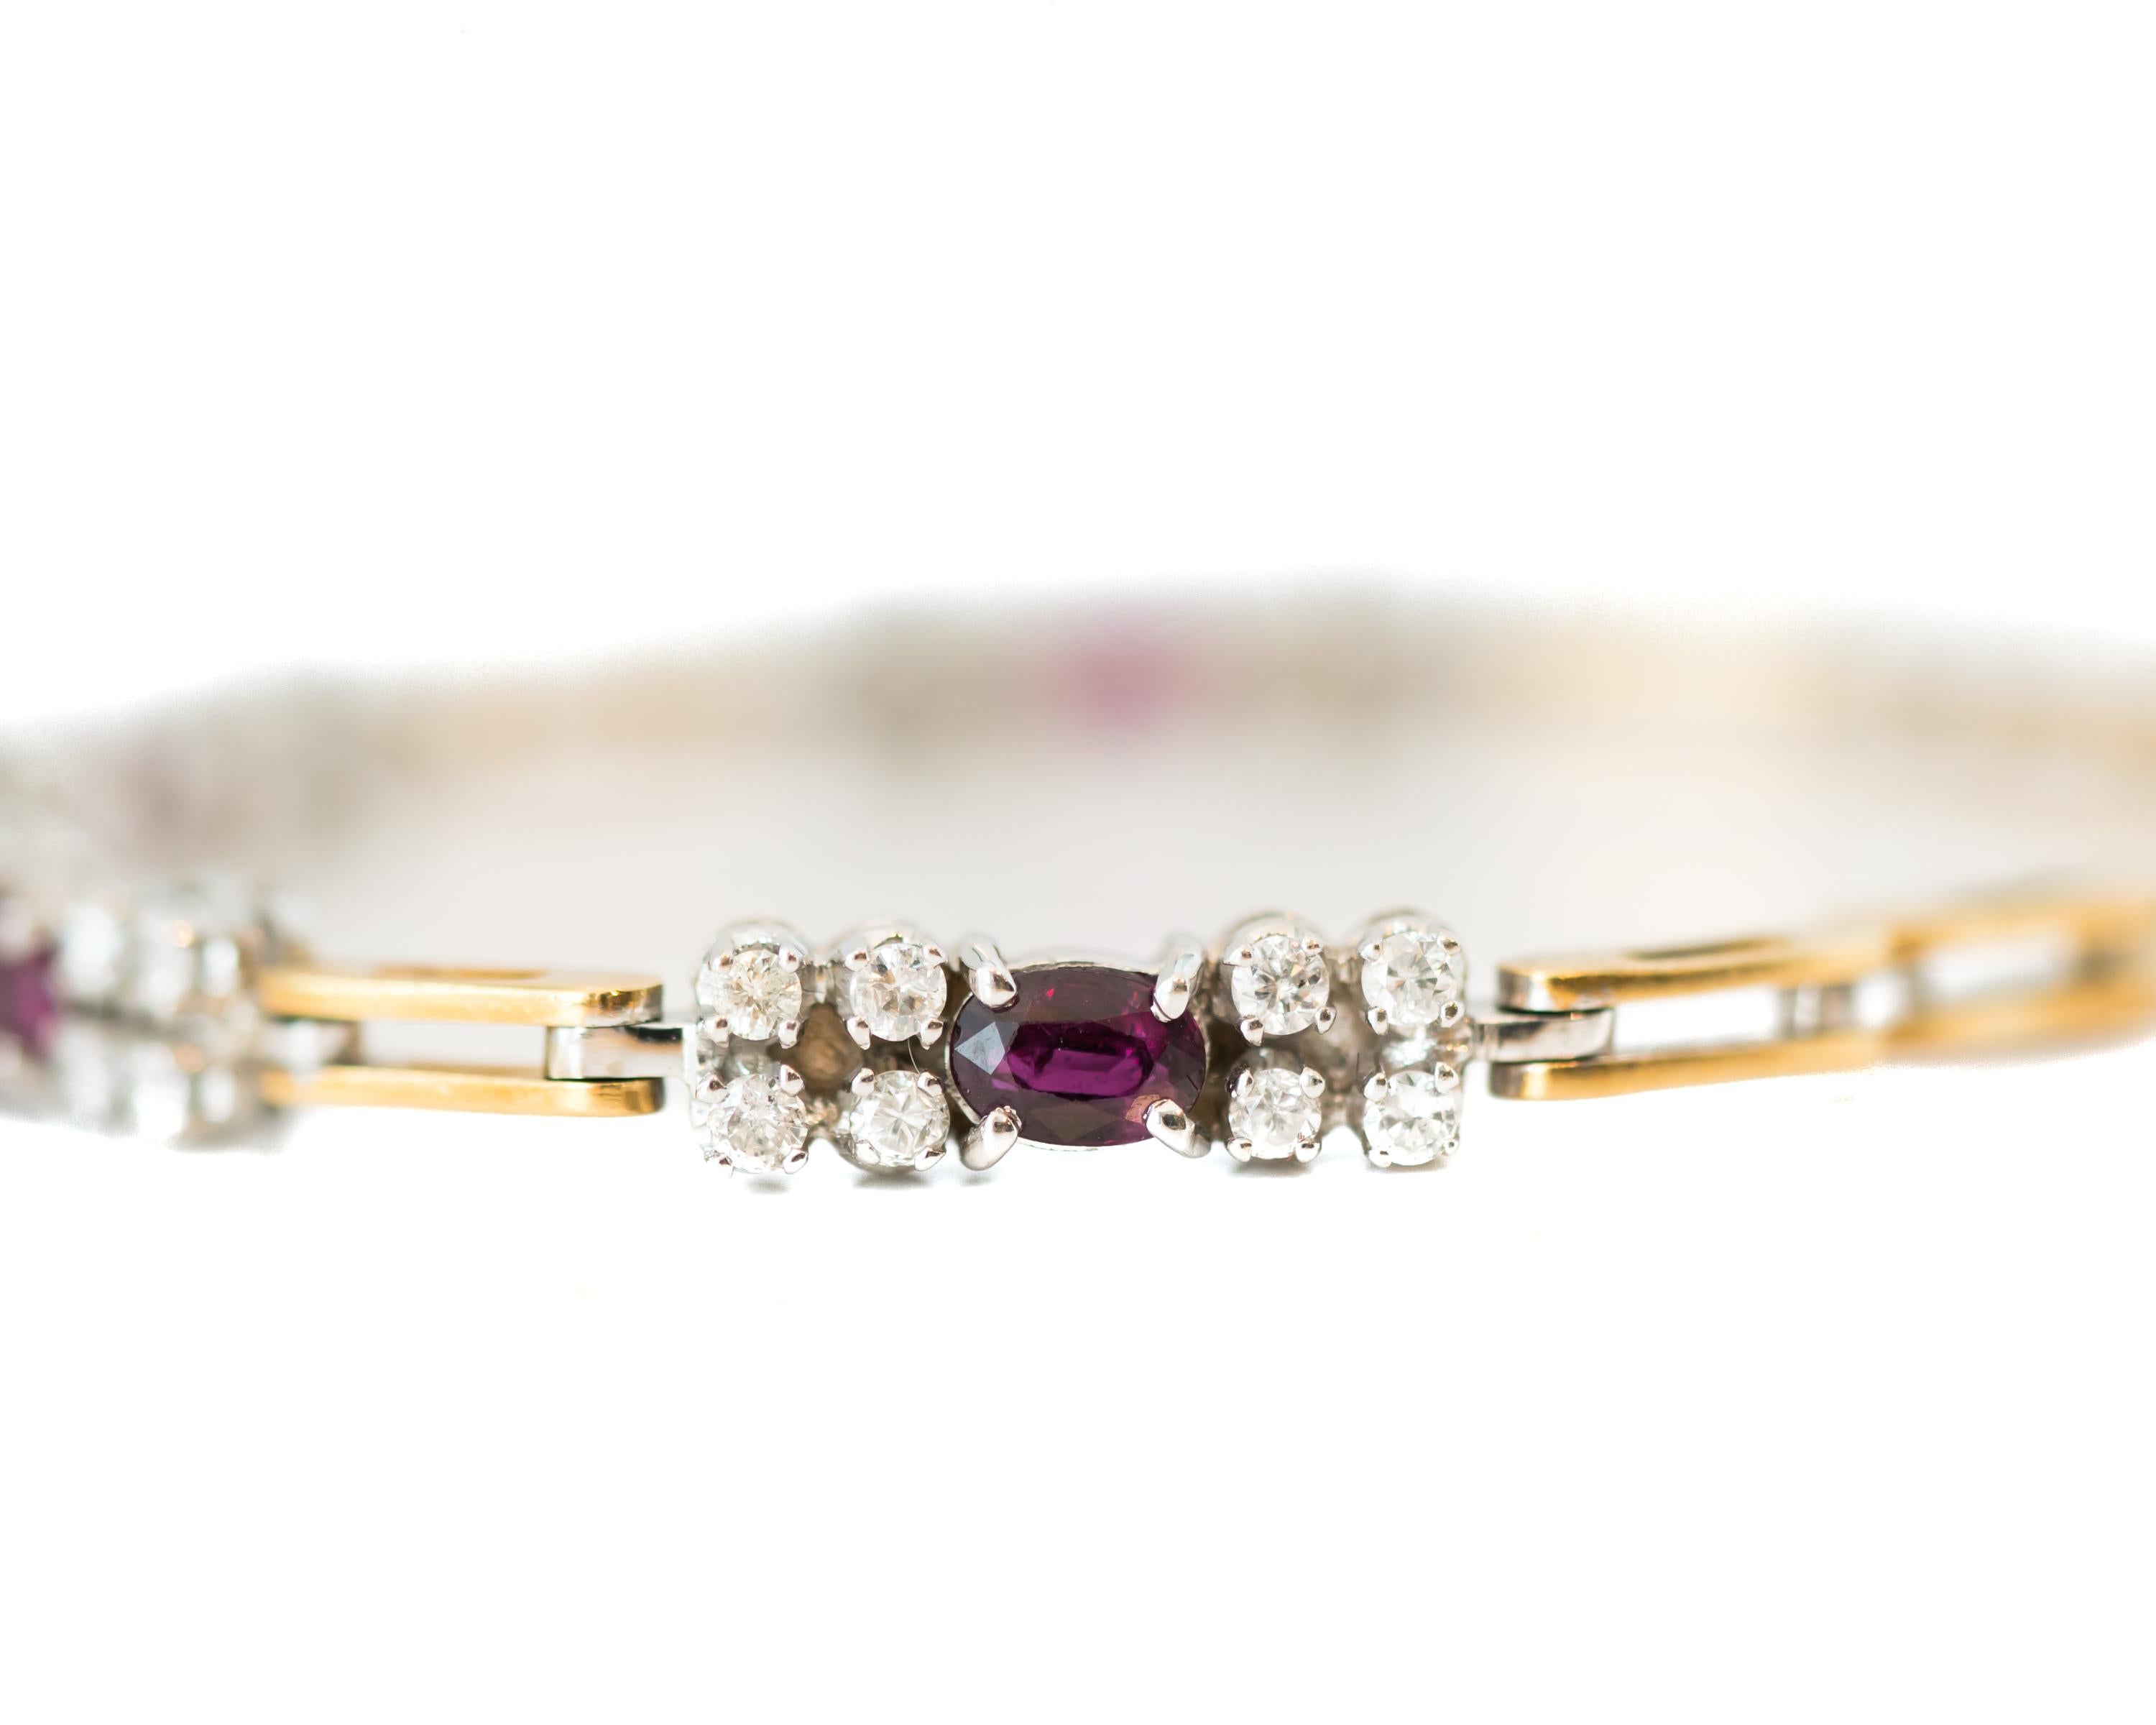 Contemporary 1980s 0.75 Carat Diamond and 1 Carat Ruby Link Bracelet in 18 Karat Gold For Sale